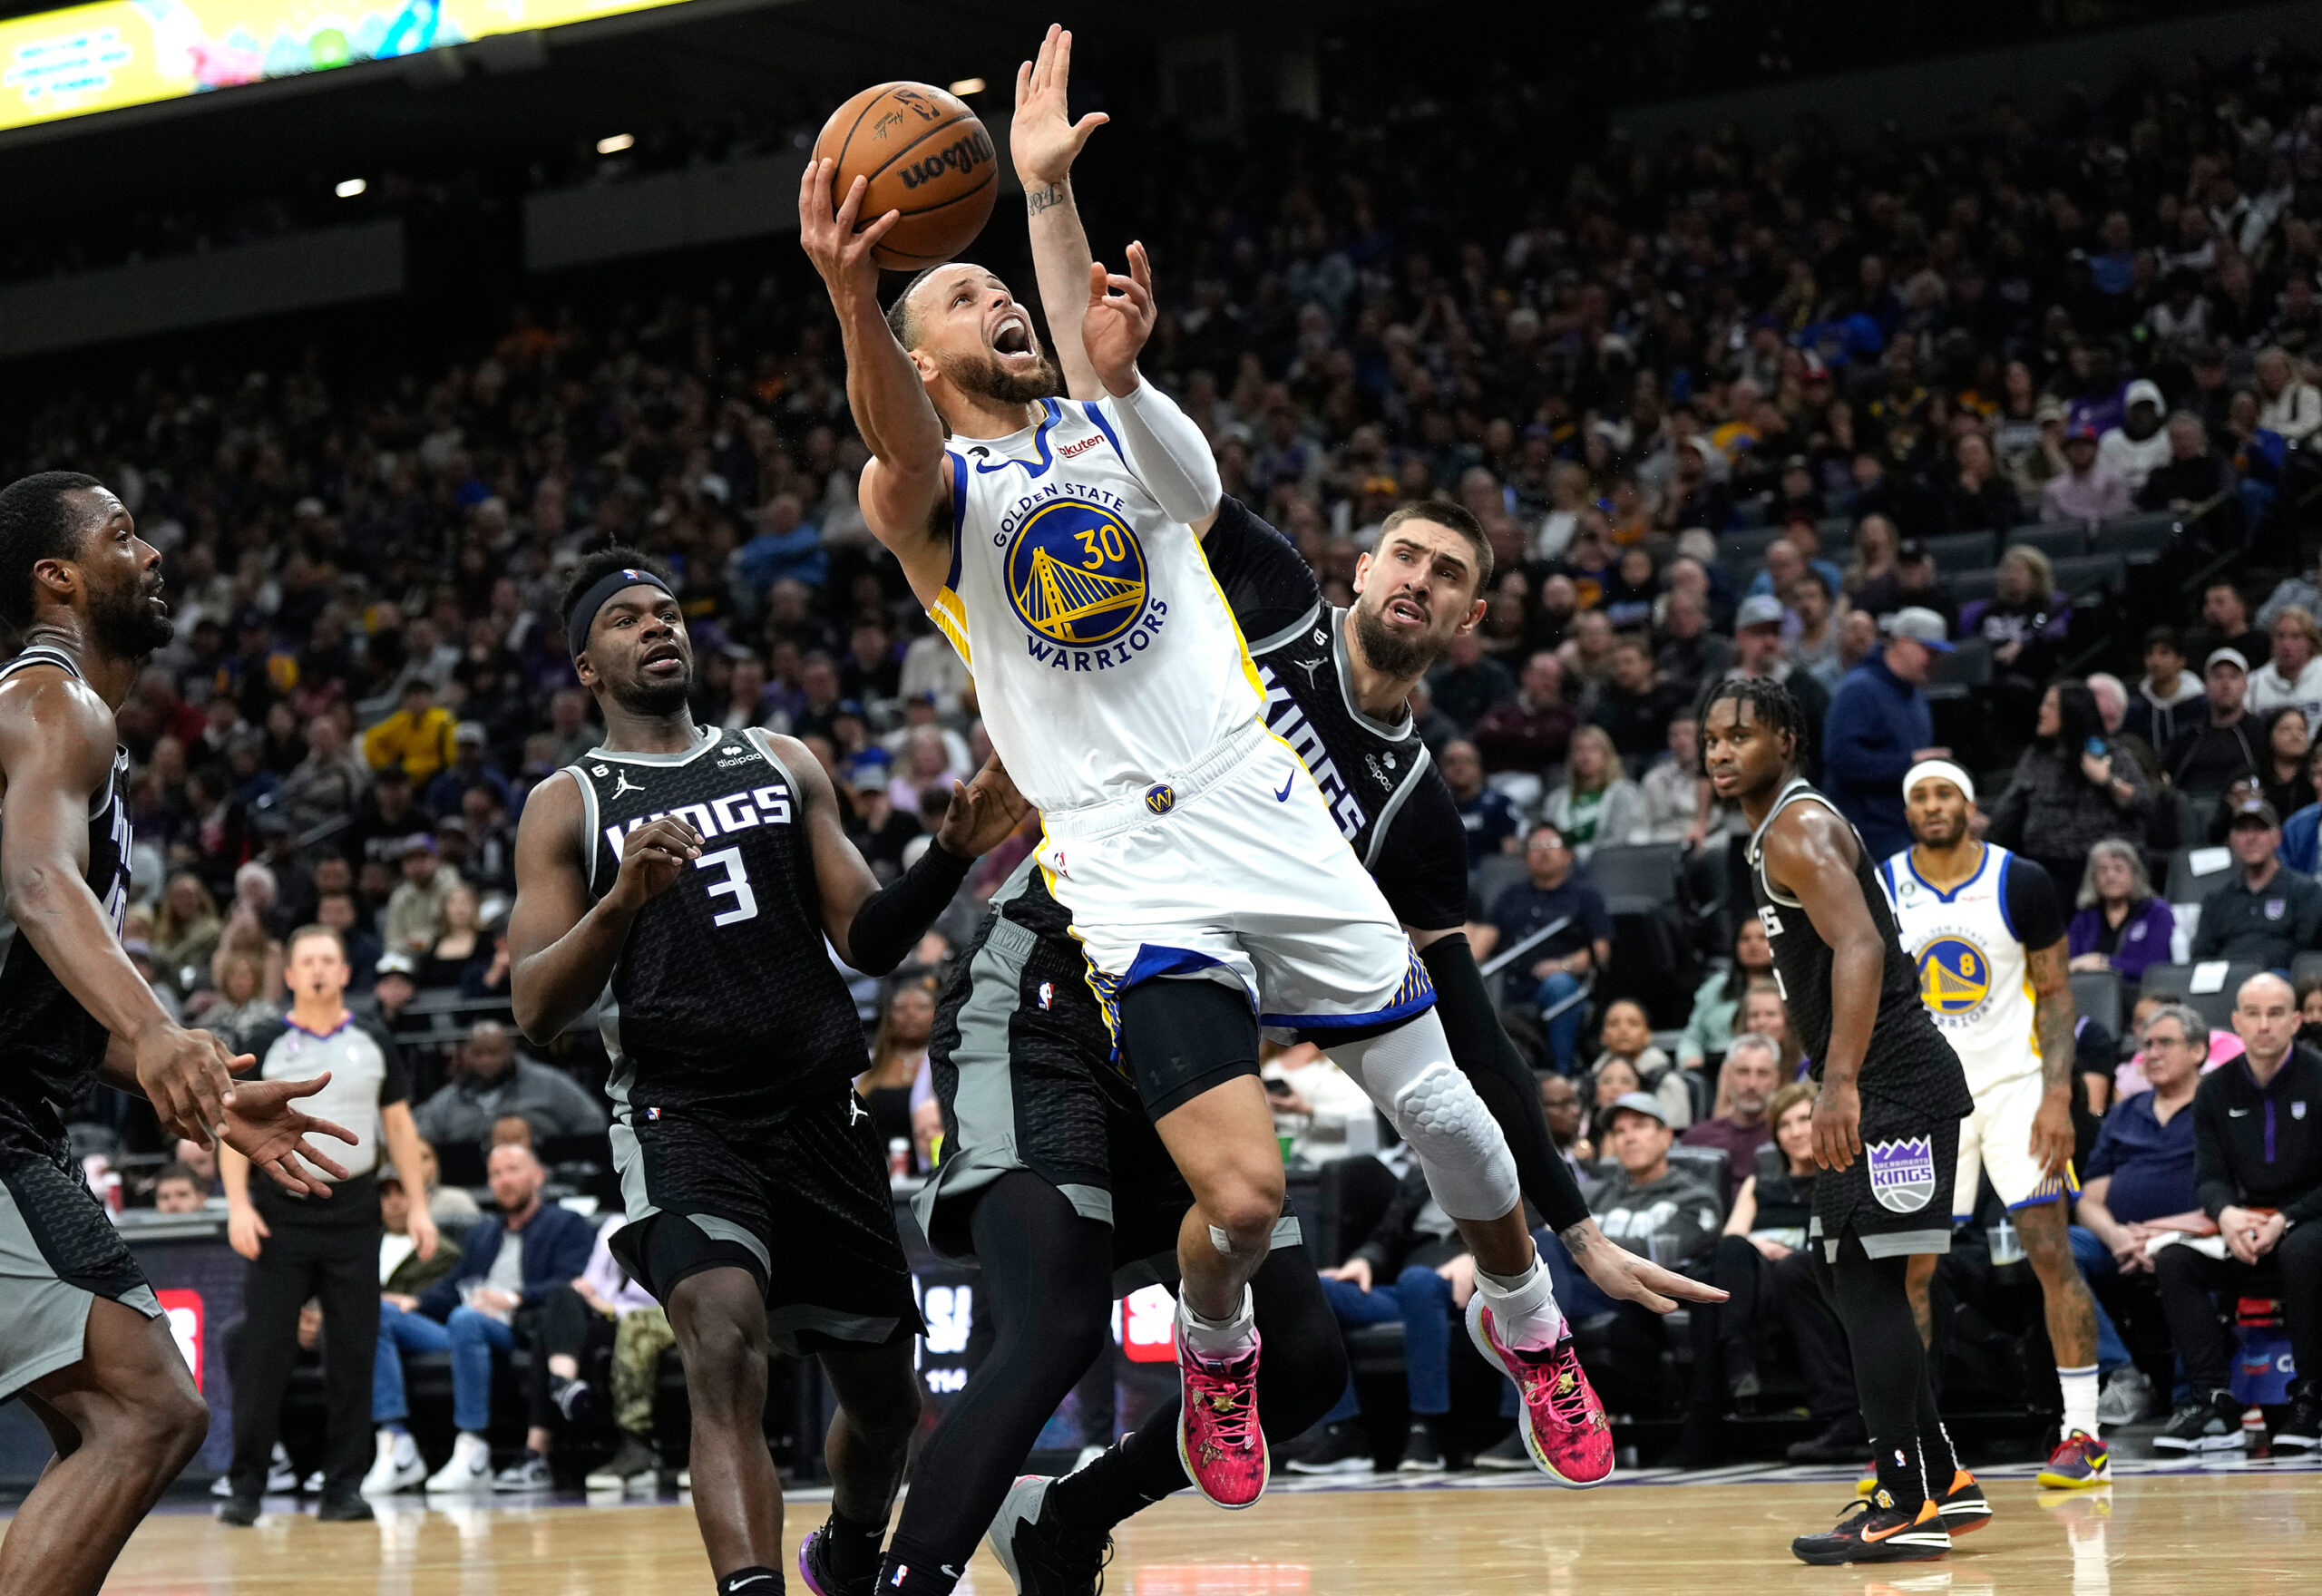 Warriors Trail Kings 2-0: The Good, the Bad and the Ugly Ahead of Game 3